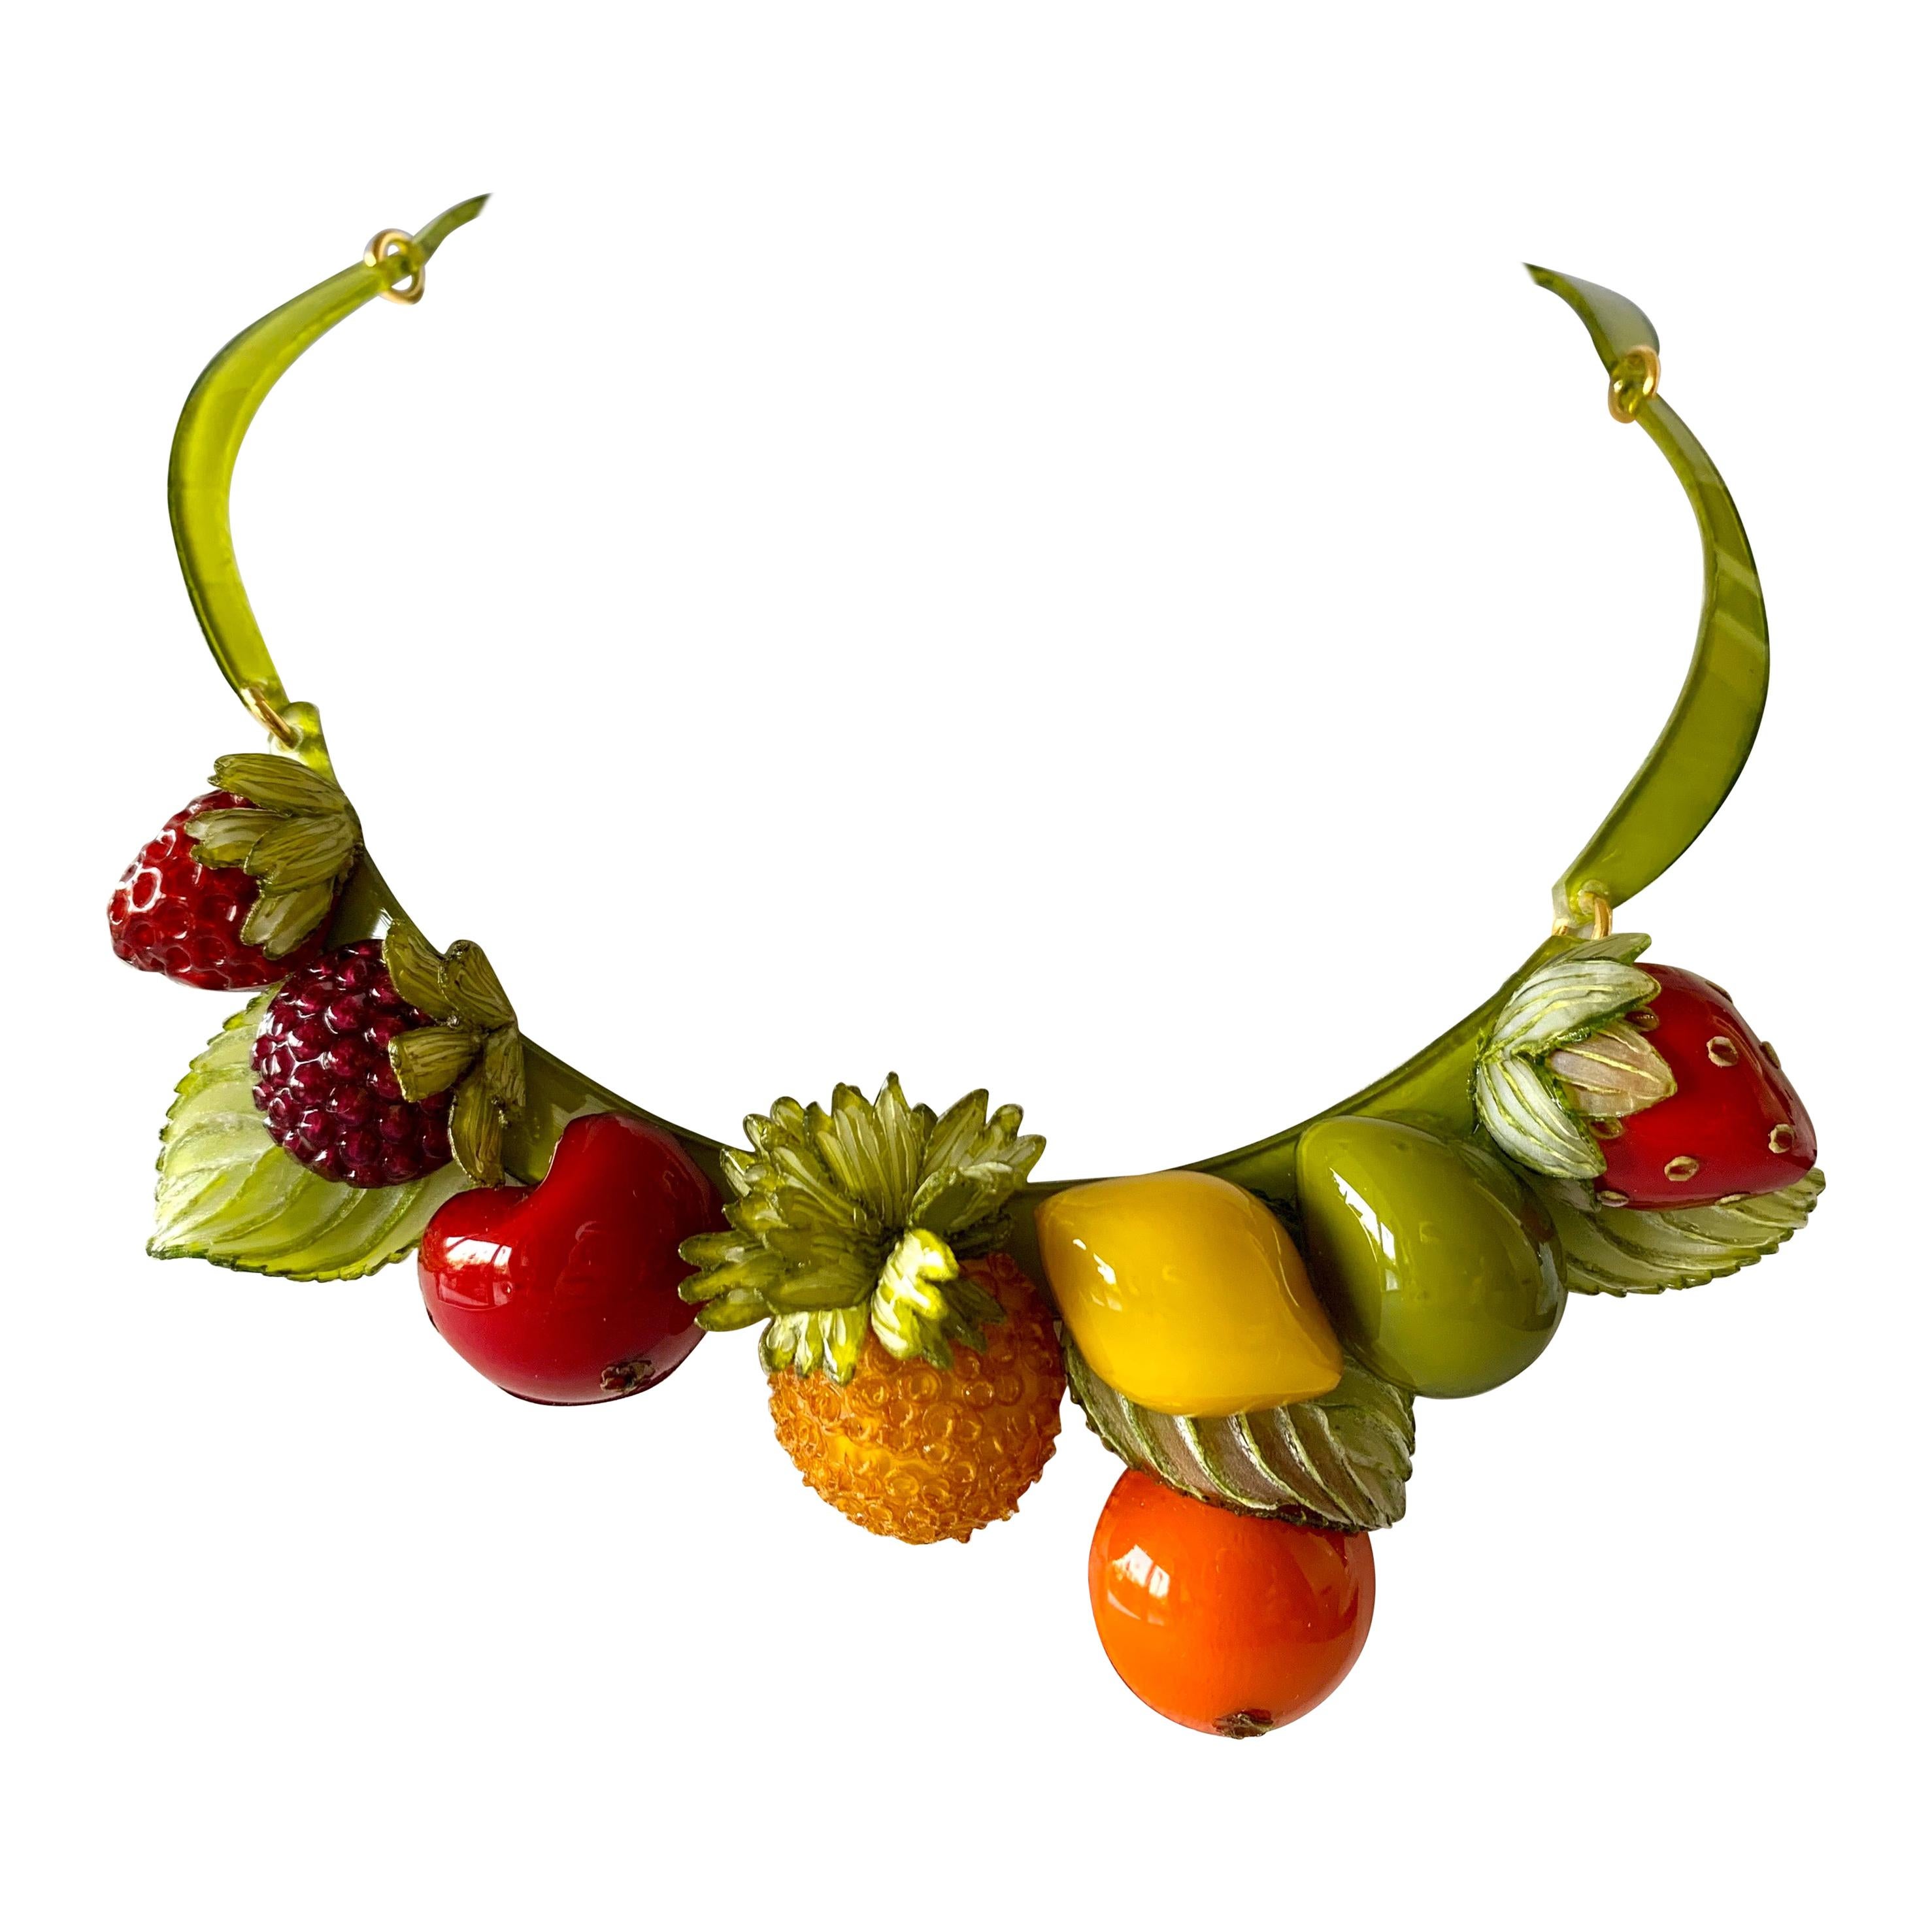 Whimsical Contemporary Fruit Statement Necklace 